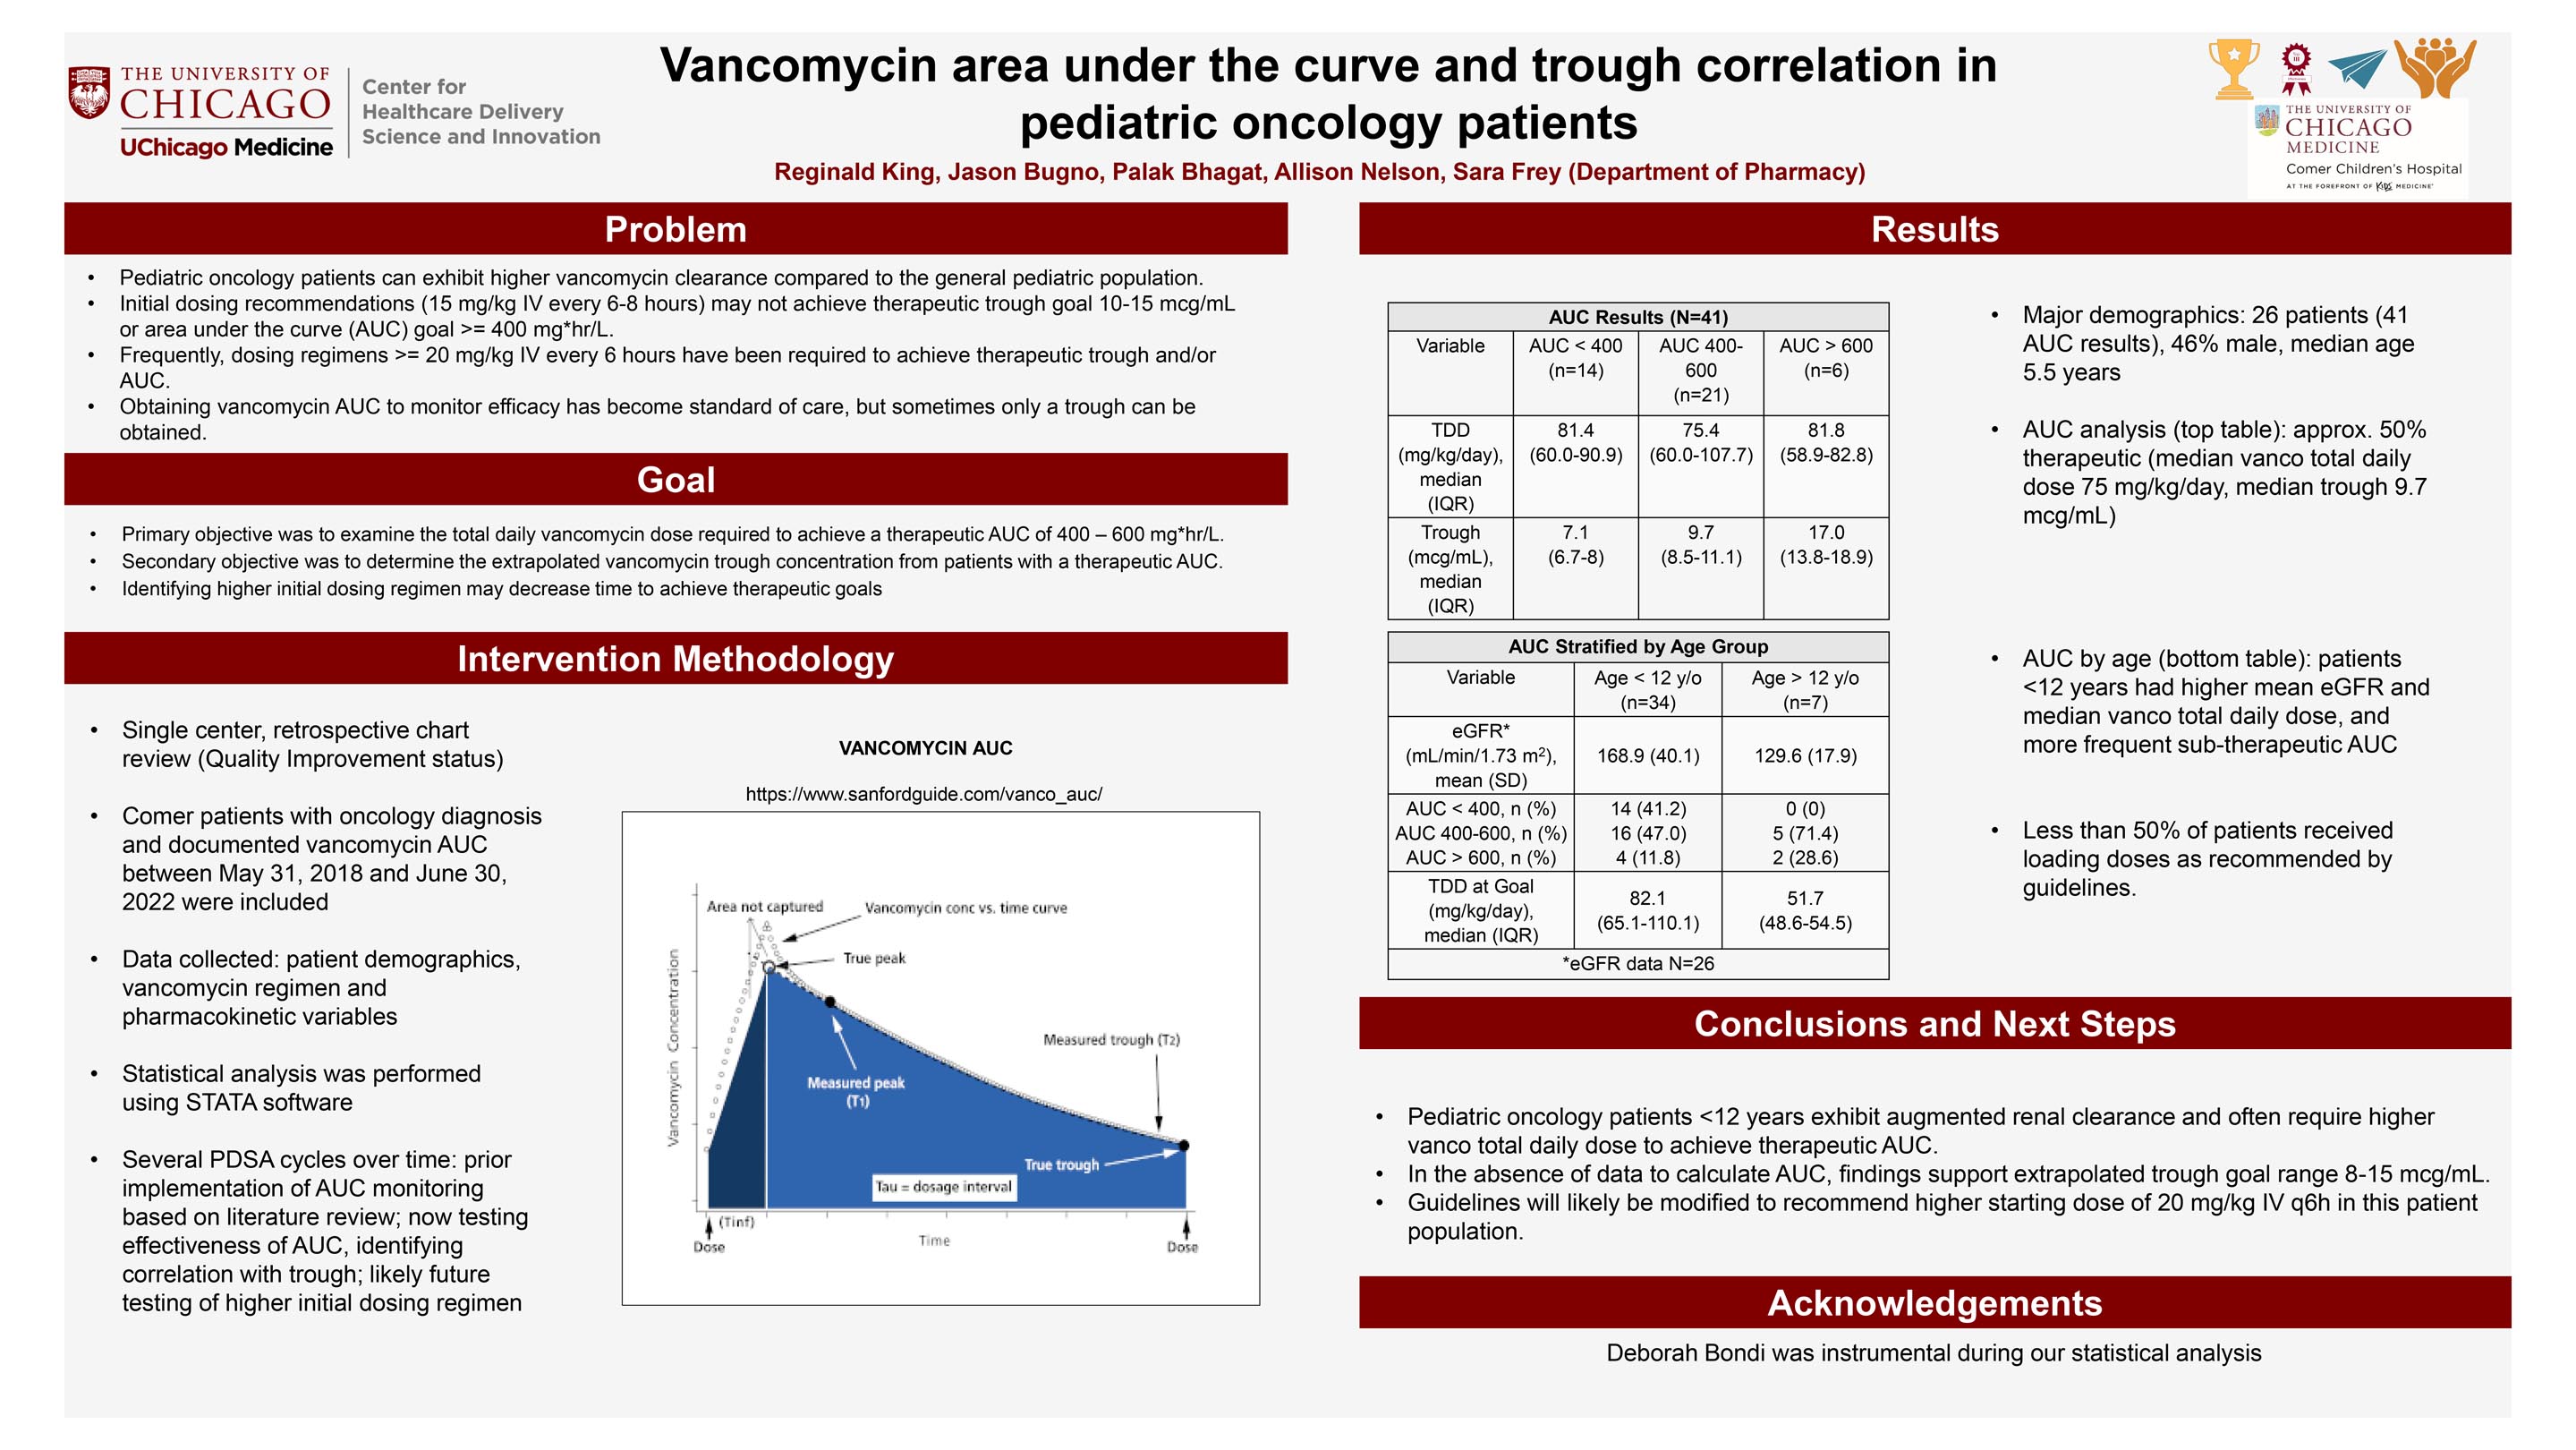 KING_Vancomycin-AUC-and-trough-correlation-in-pediatric-oncology-patients